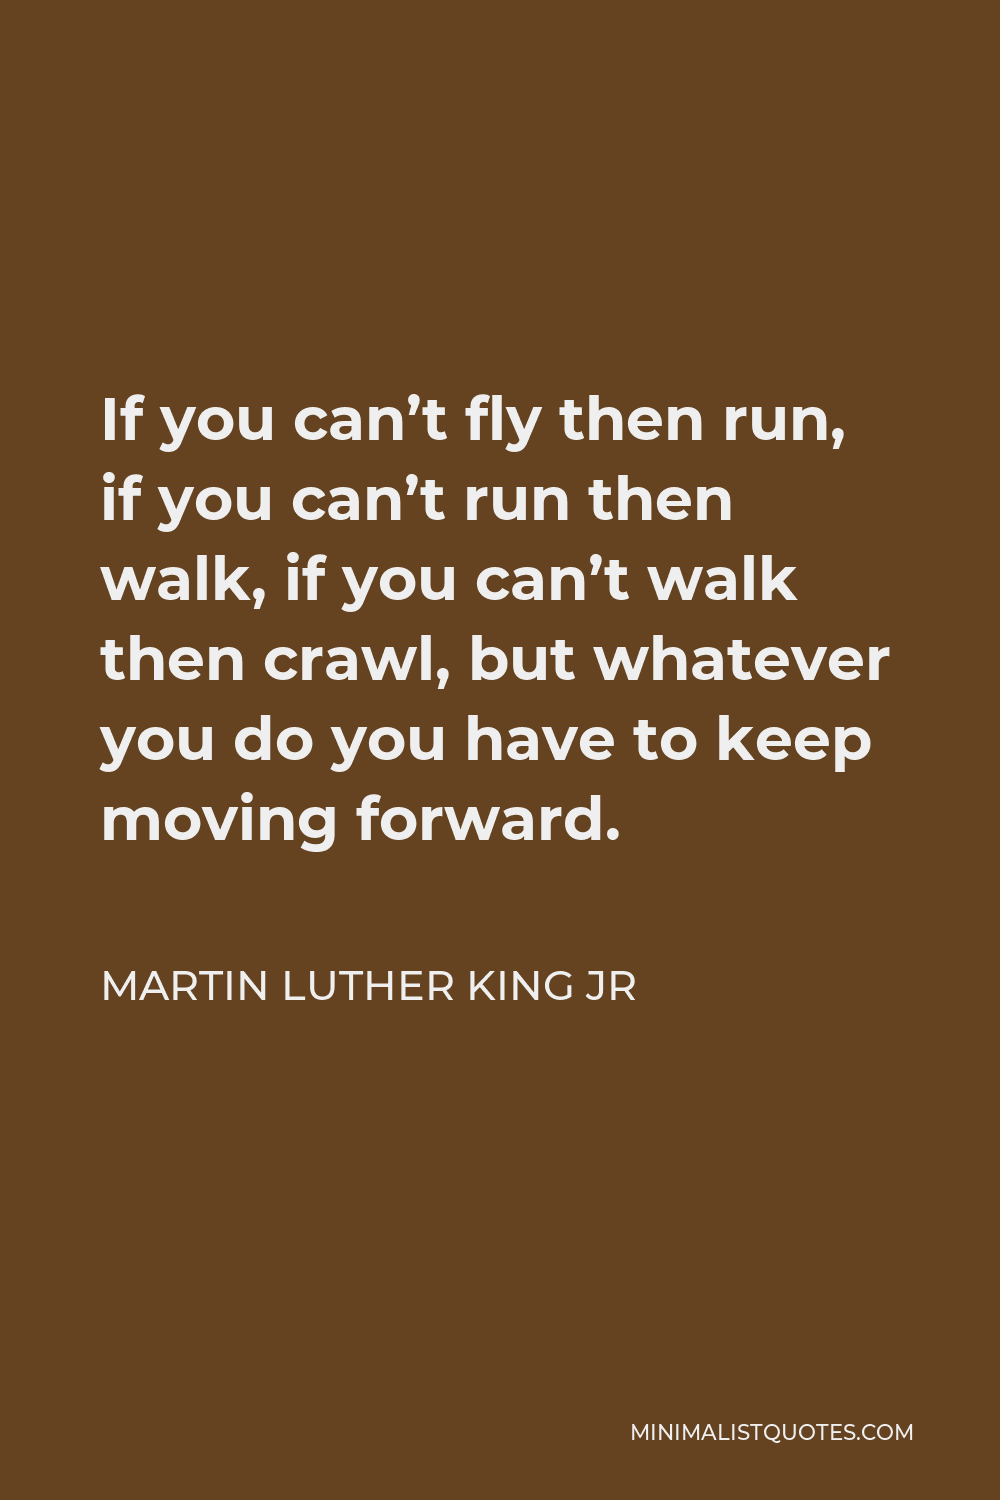 Martin Luther King Jr Quote - If you can’t fly then run, if you can’t run then walk, if you can’t walk then crawl, but whatever you do you have to keep moving forward.